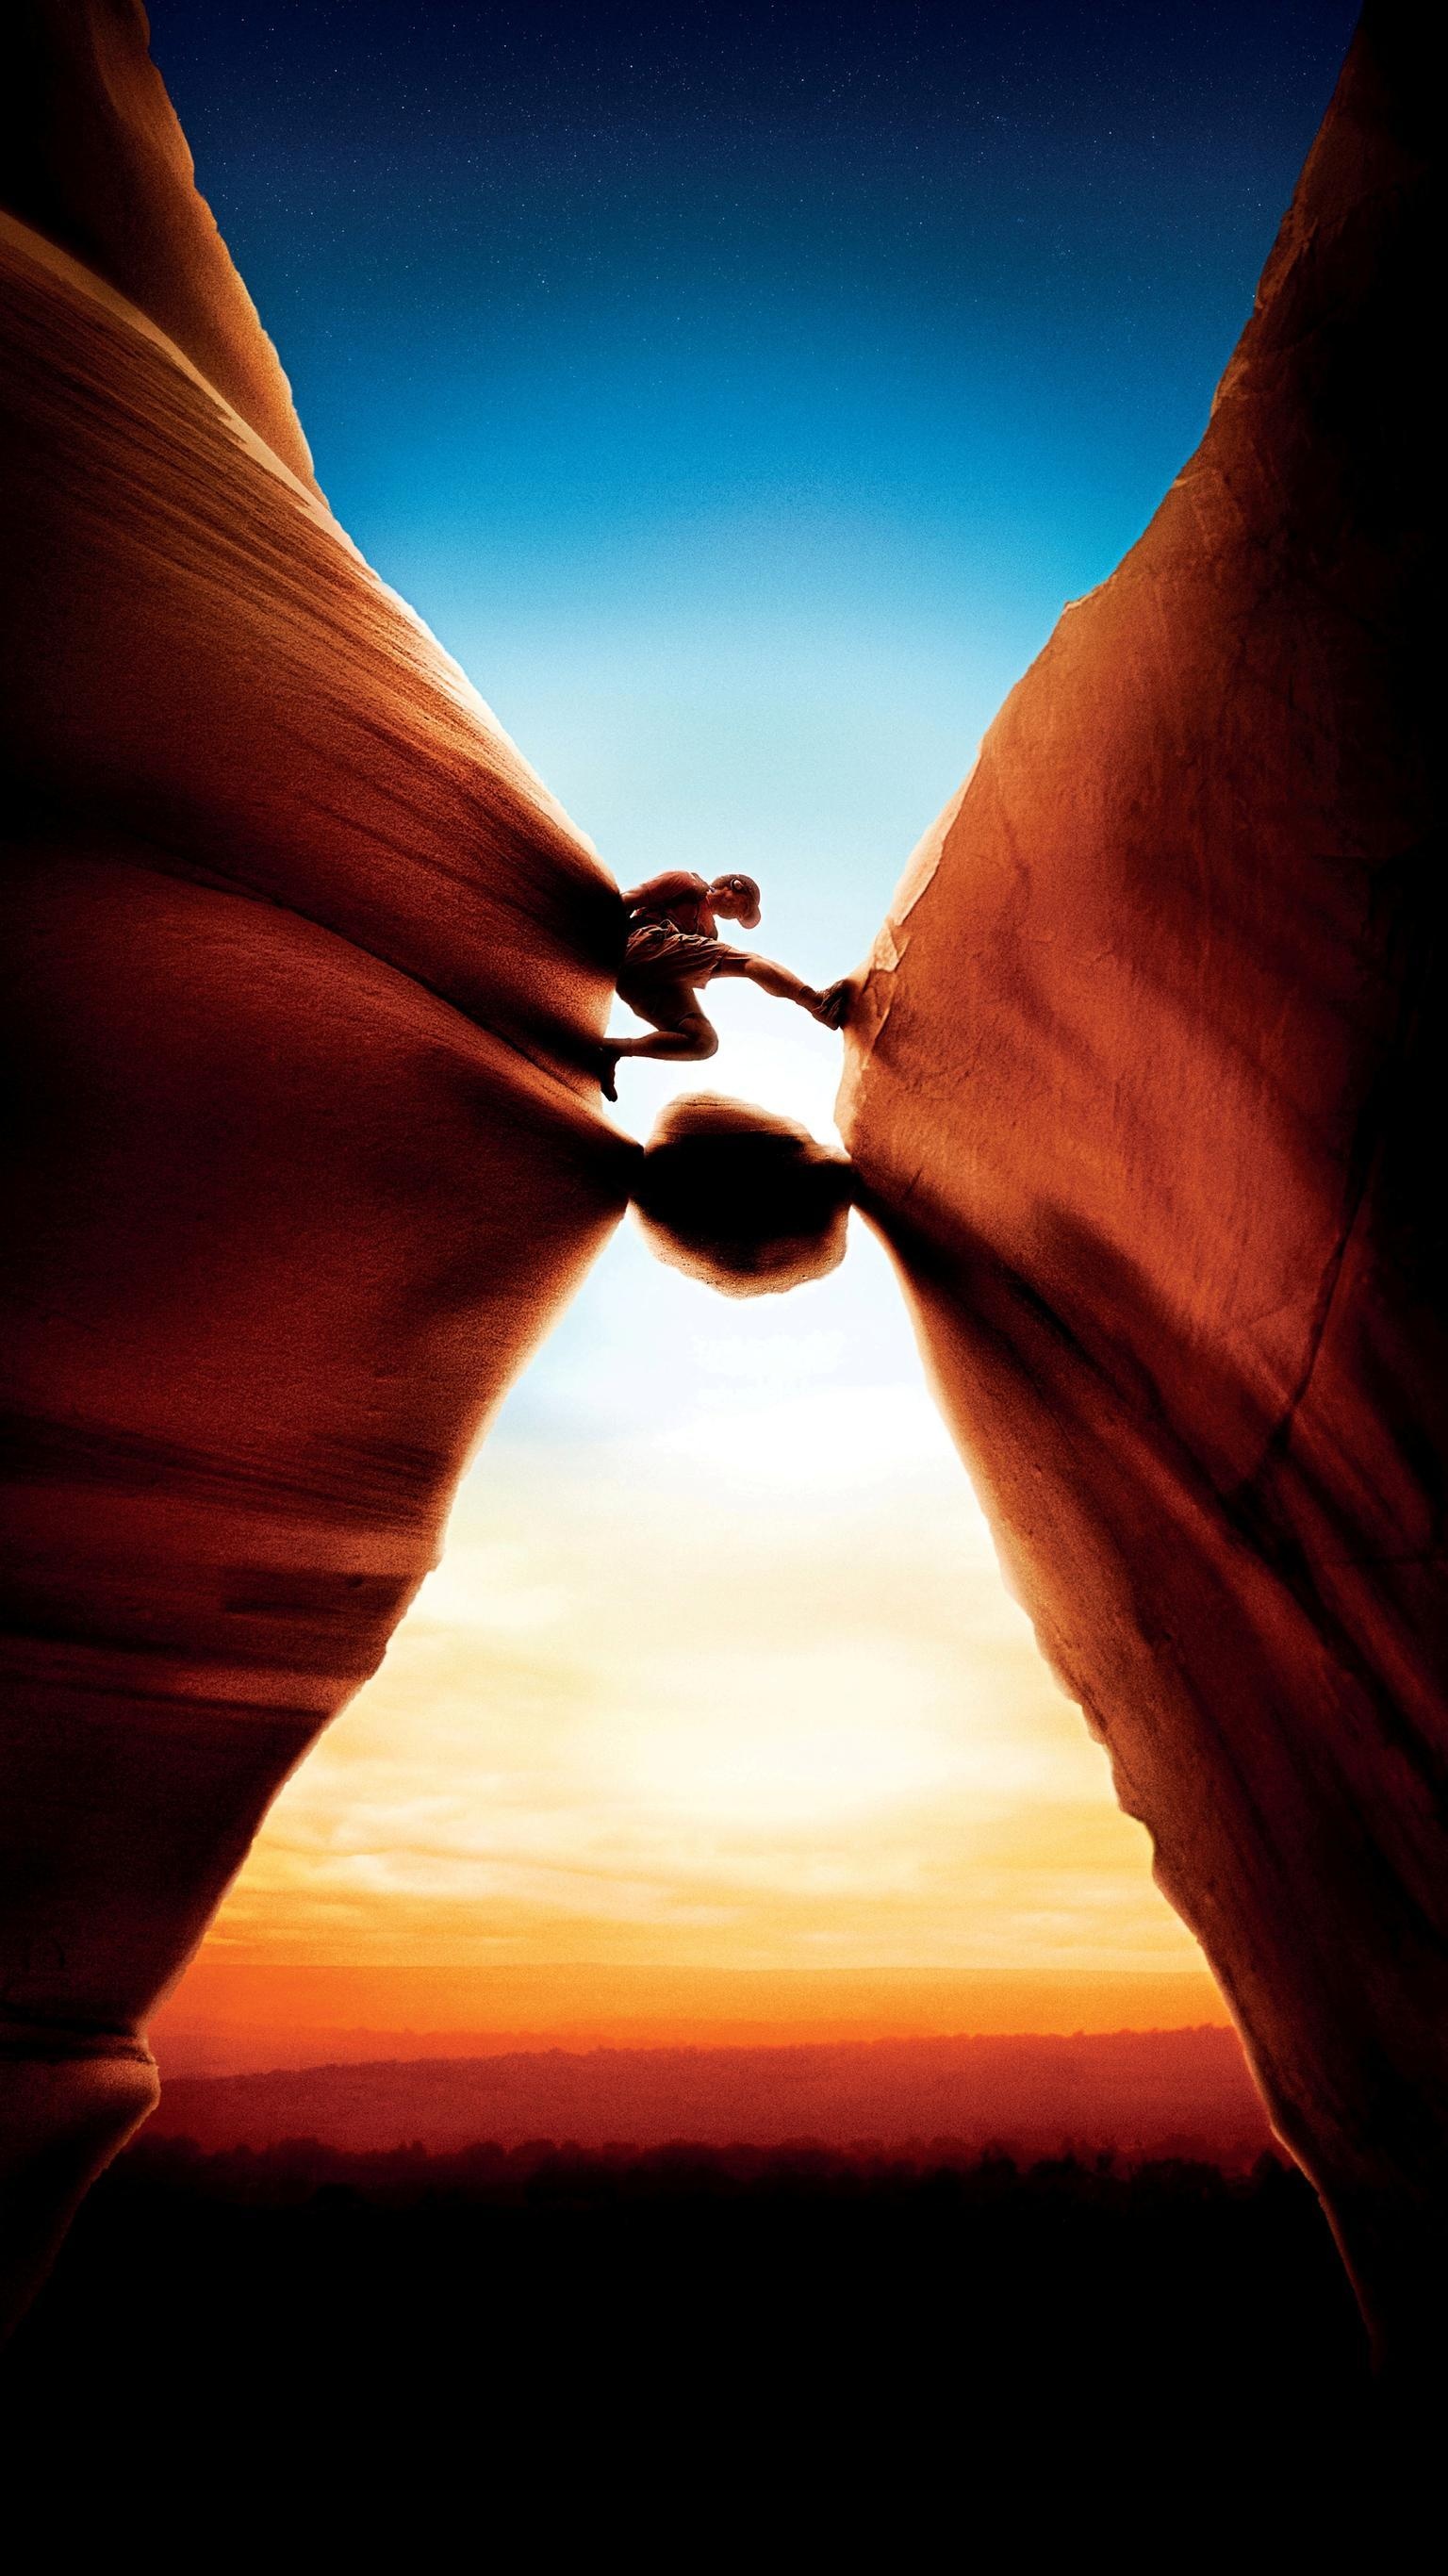 127 Hours: In the film, canyoneer Aron Ralston must find a way to escape after he gets trapped by a boulder. 1540x2740 HD Wallpaper.